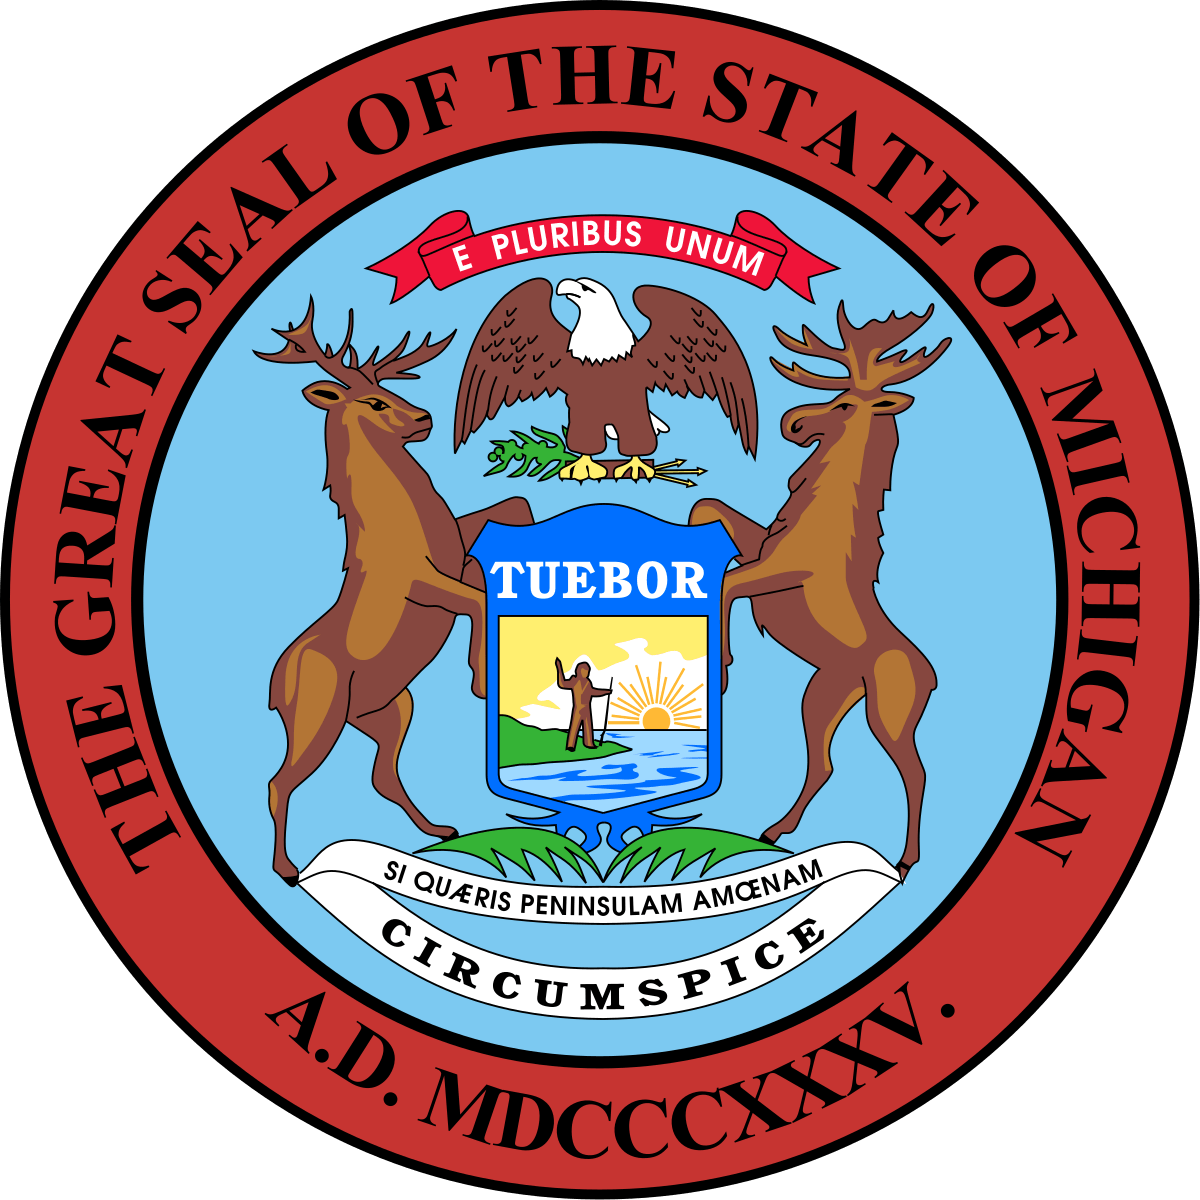 Management and Budget Director, Department of Technology, State of Michigan Logo